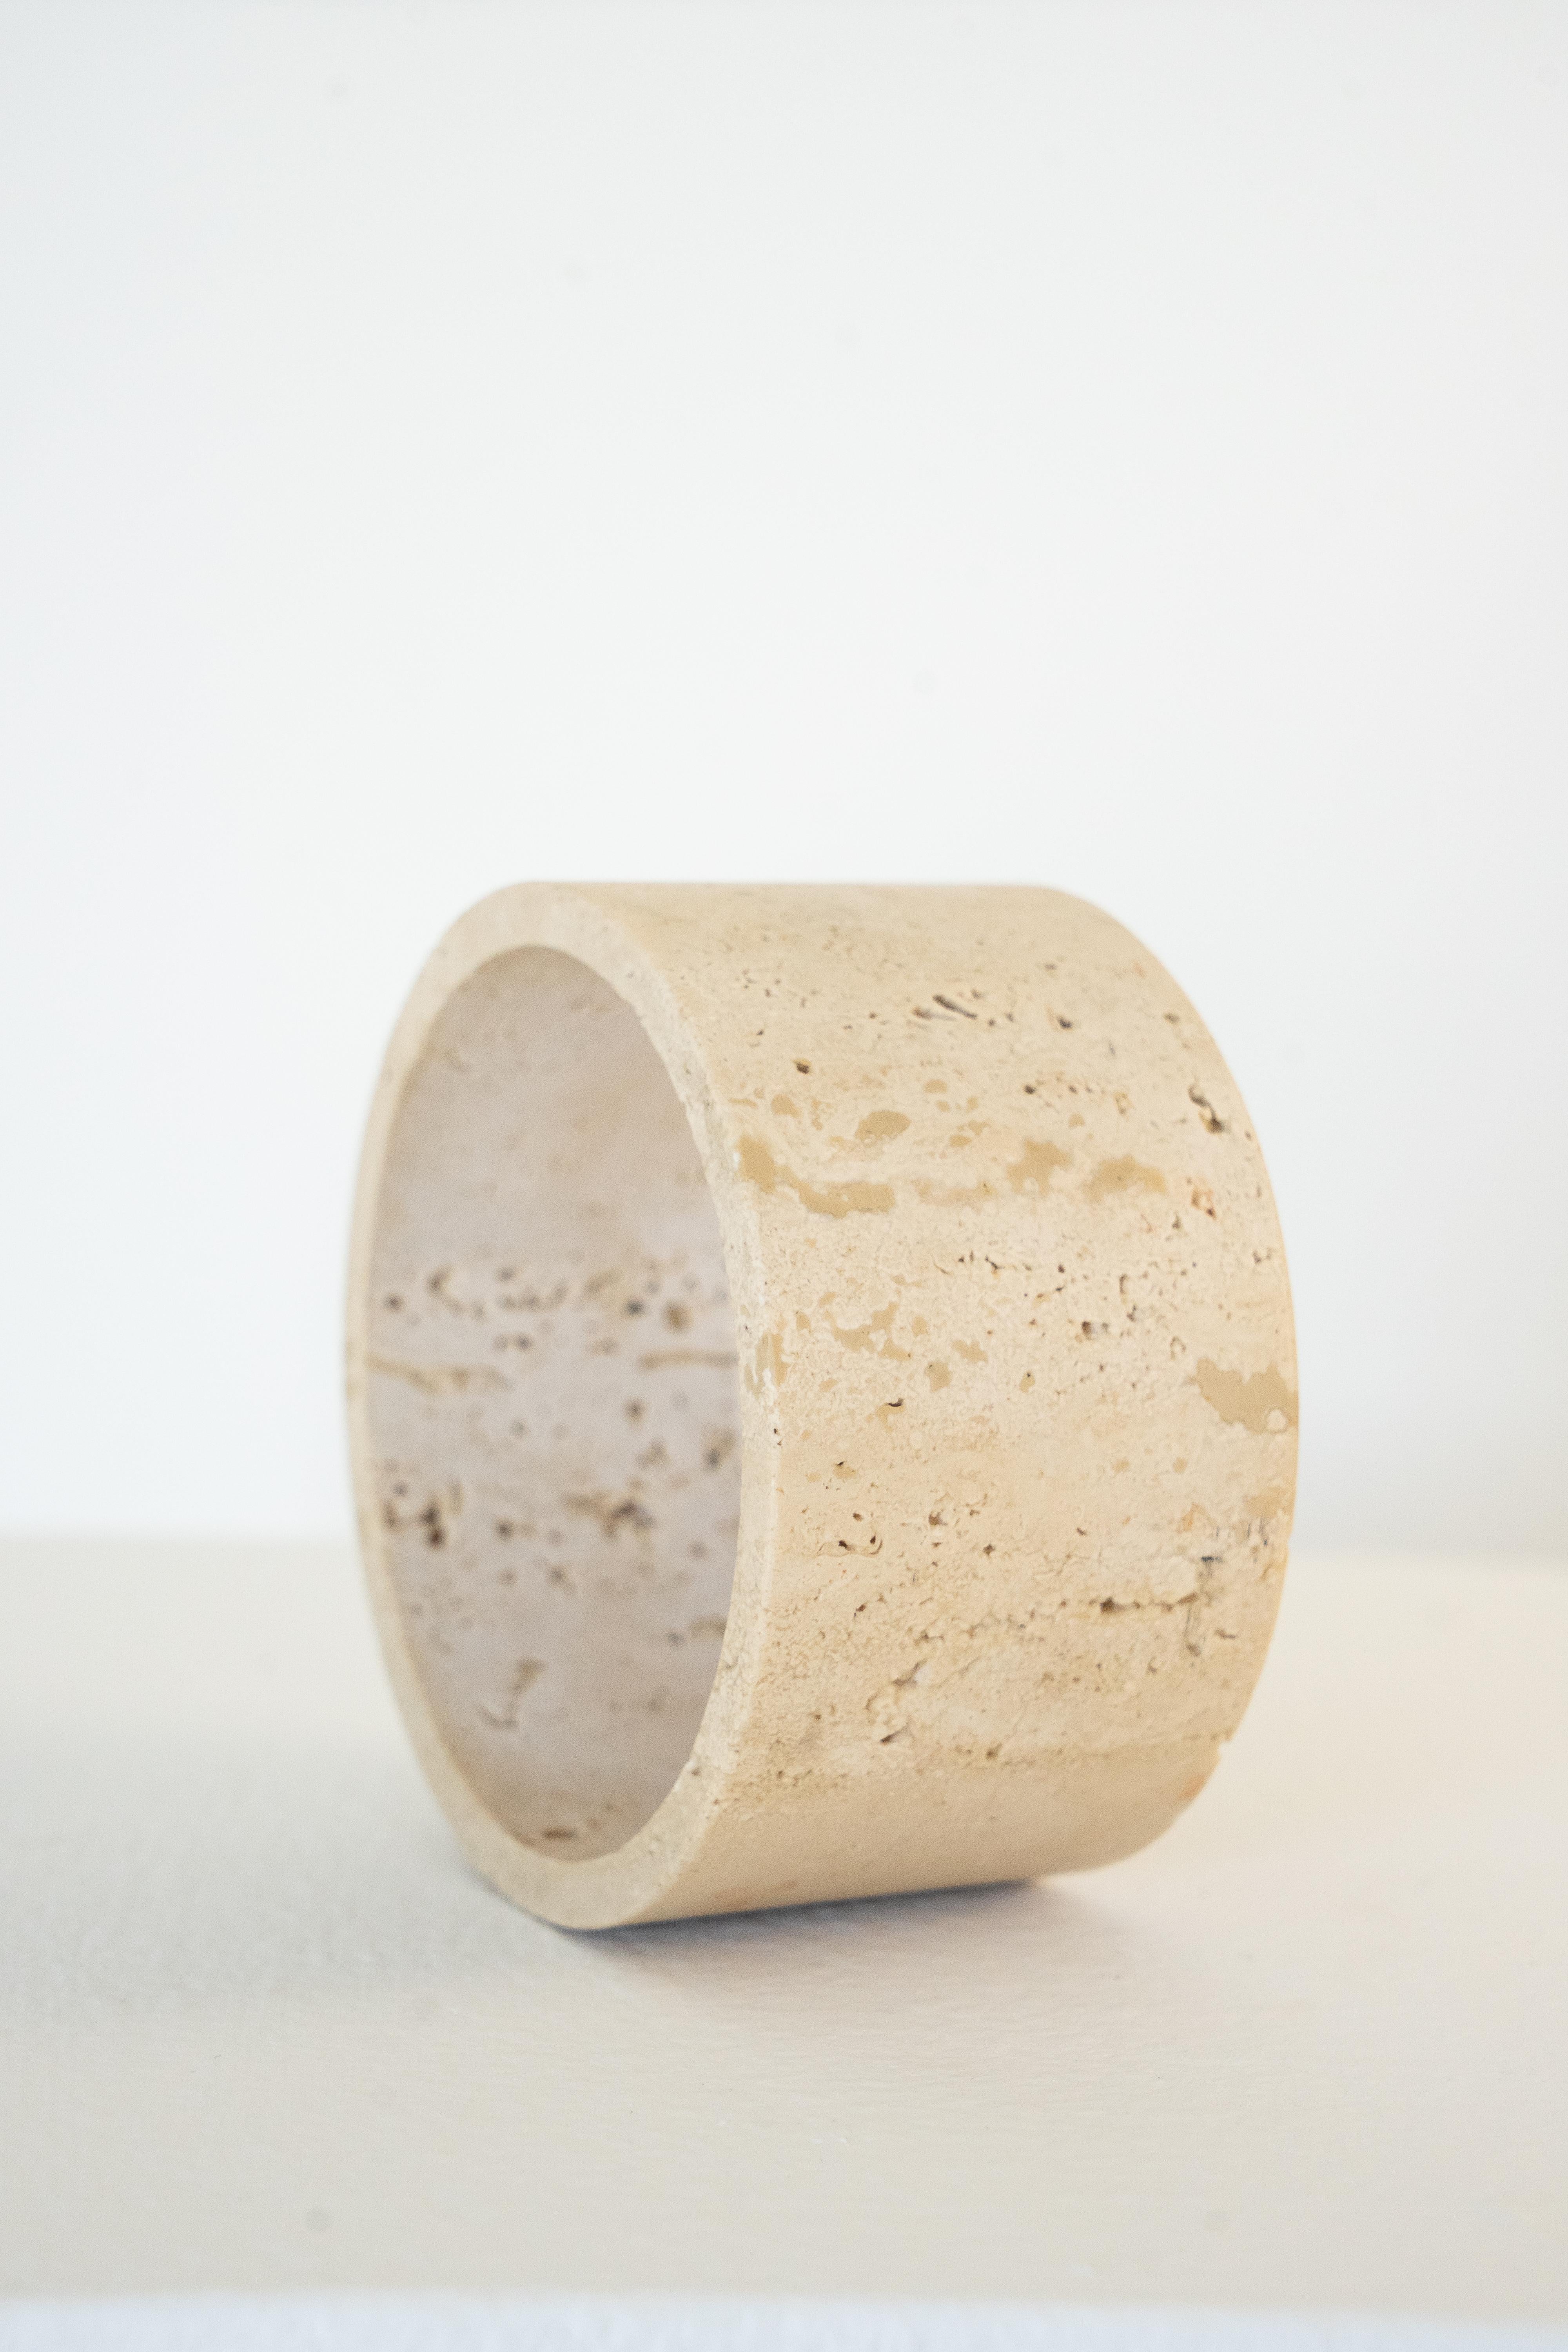 Hand-Crafted Vintage Italian Travertine Cylinder Vessel, Circa 1970s For Sale